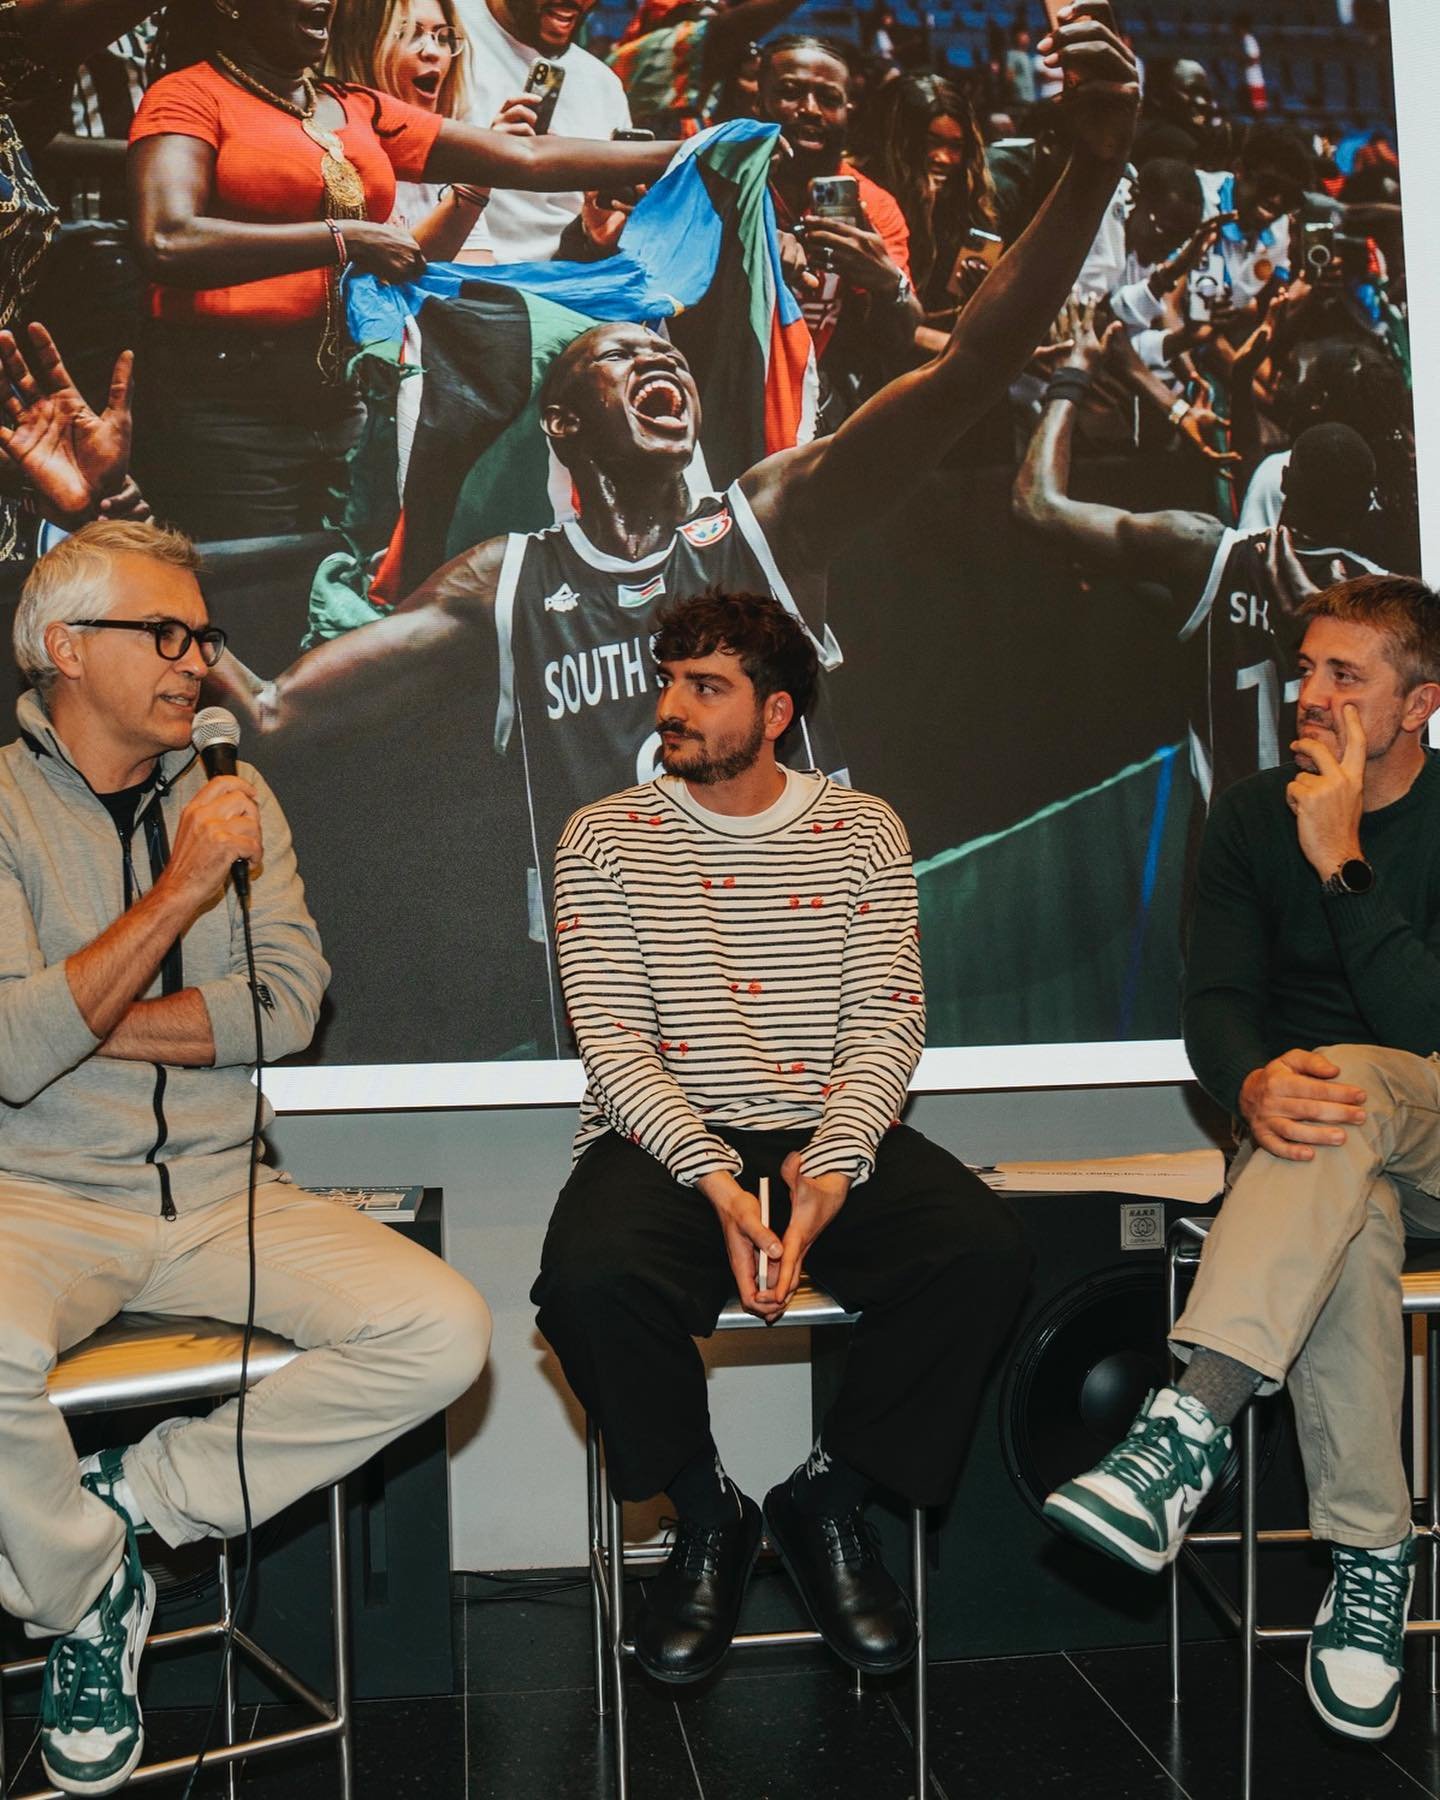 Discovering basketball overseas through storytelling. Discovering storytelling through overseas storytellers.

Thanks to @alessandromamoli and @maurobev for once again enriching the waves of basketball culture.

Thank you Milan and Milanese for ridin